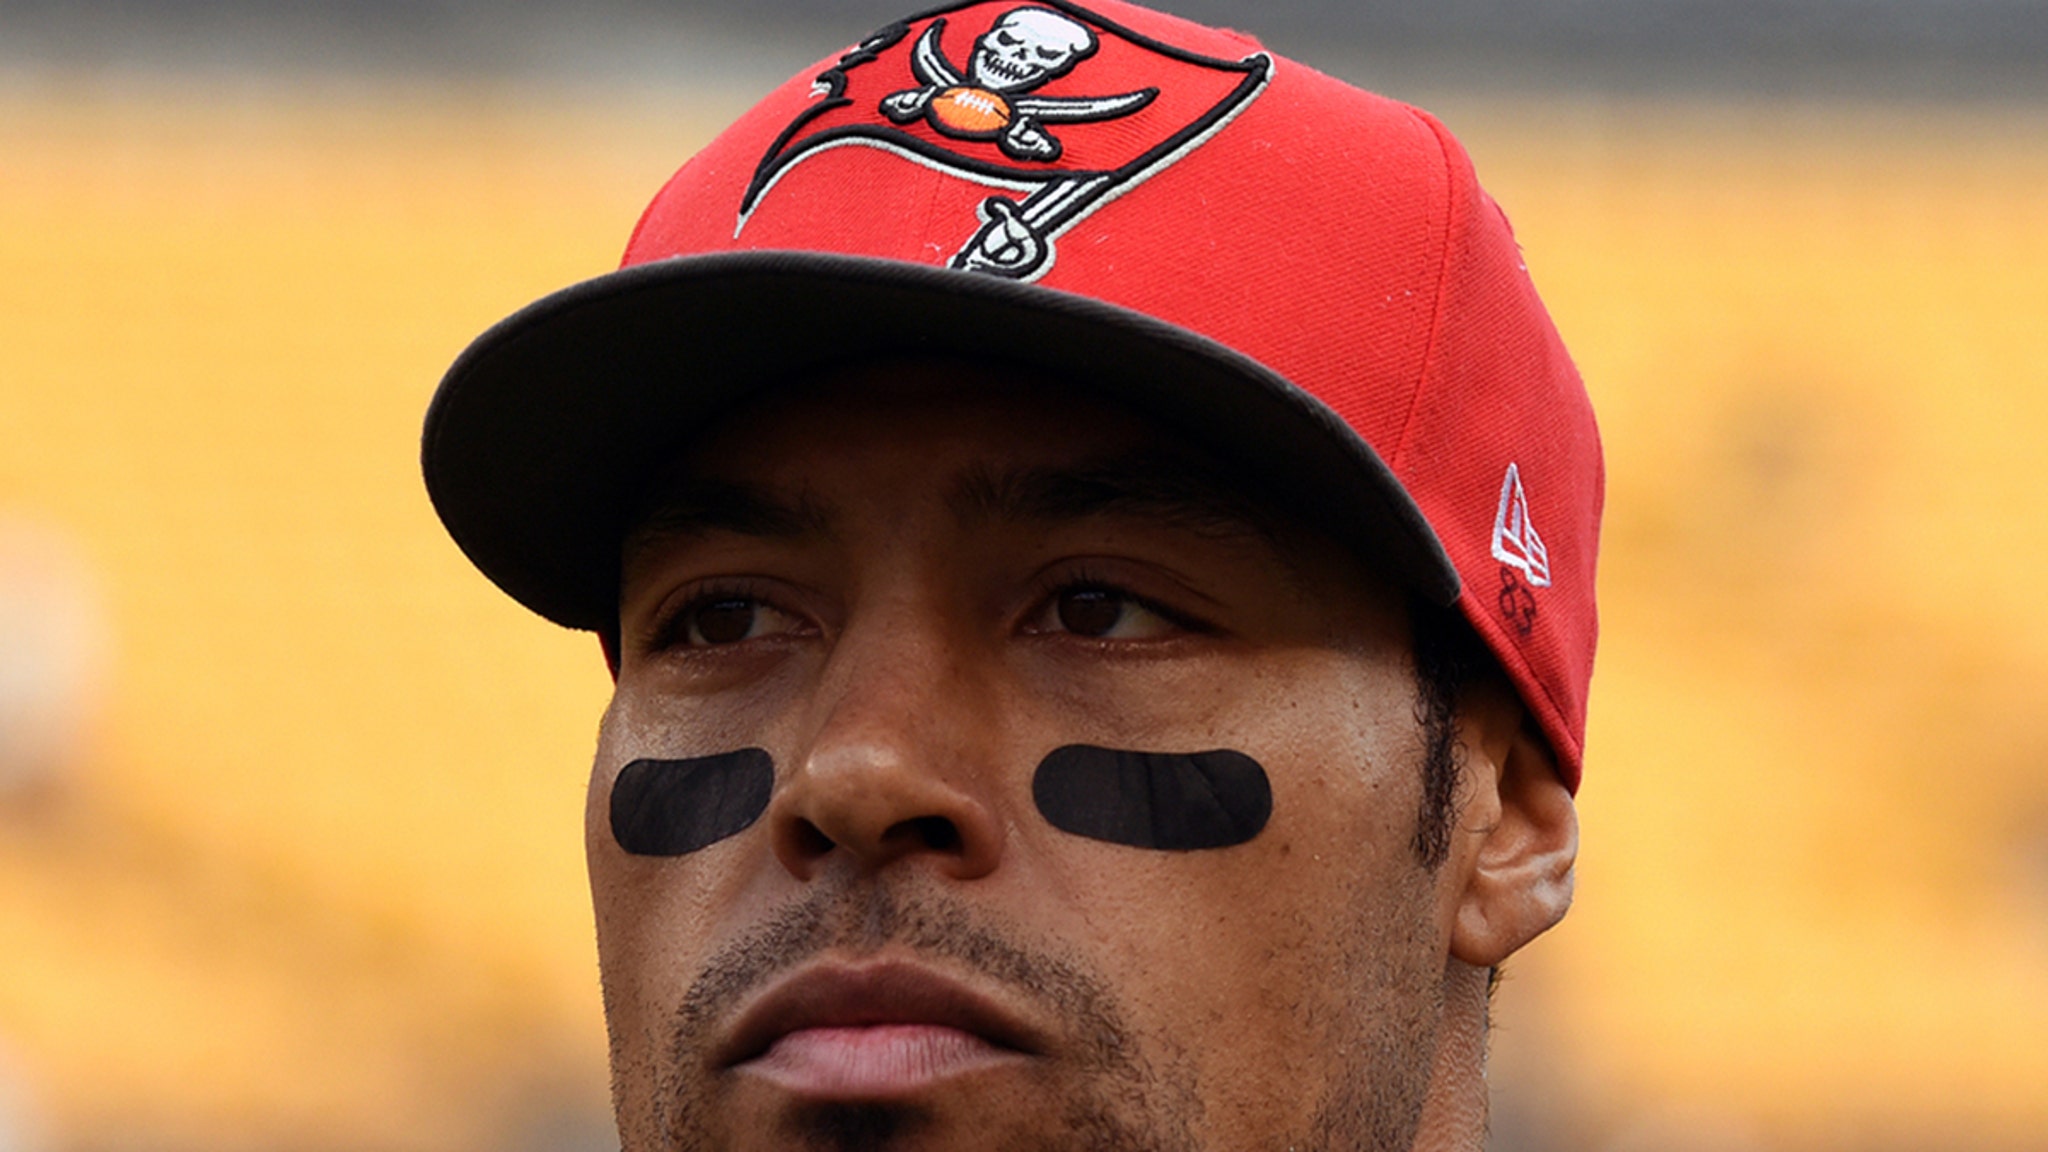 Vincent Jackson’s autopsy shows that he “suffered from chronic alcoholism”, says the sheriff